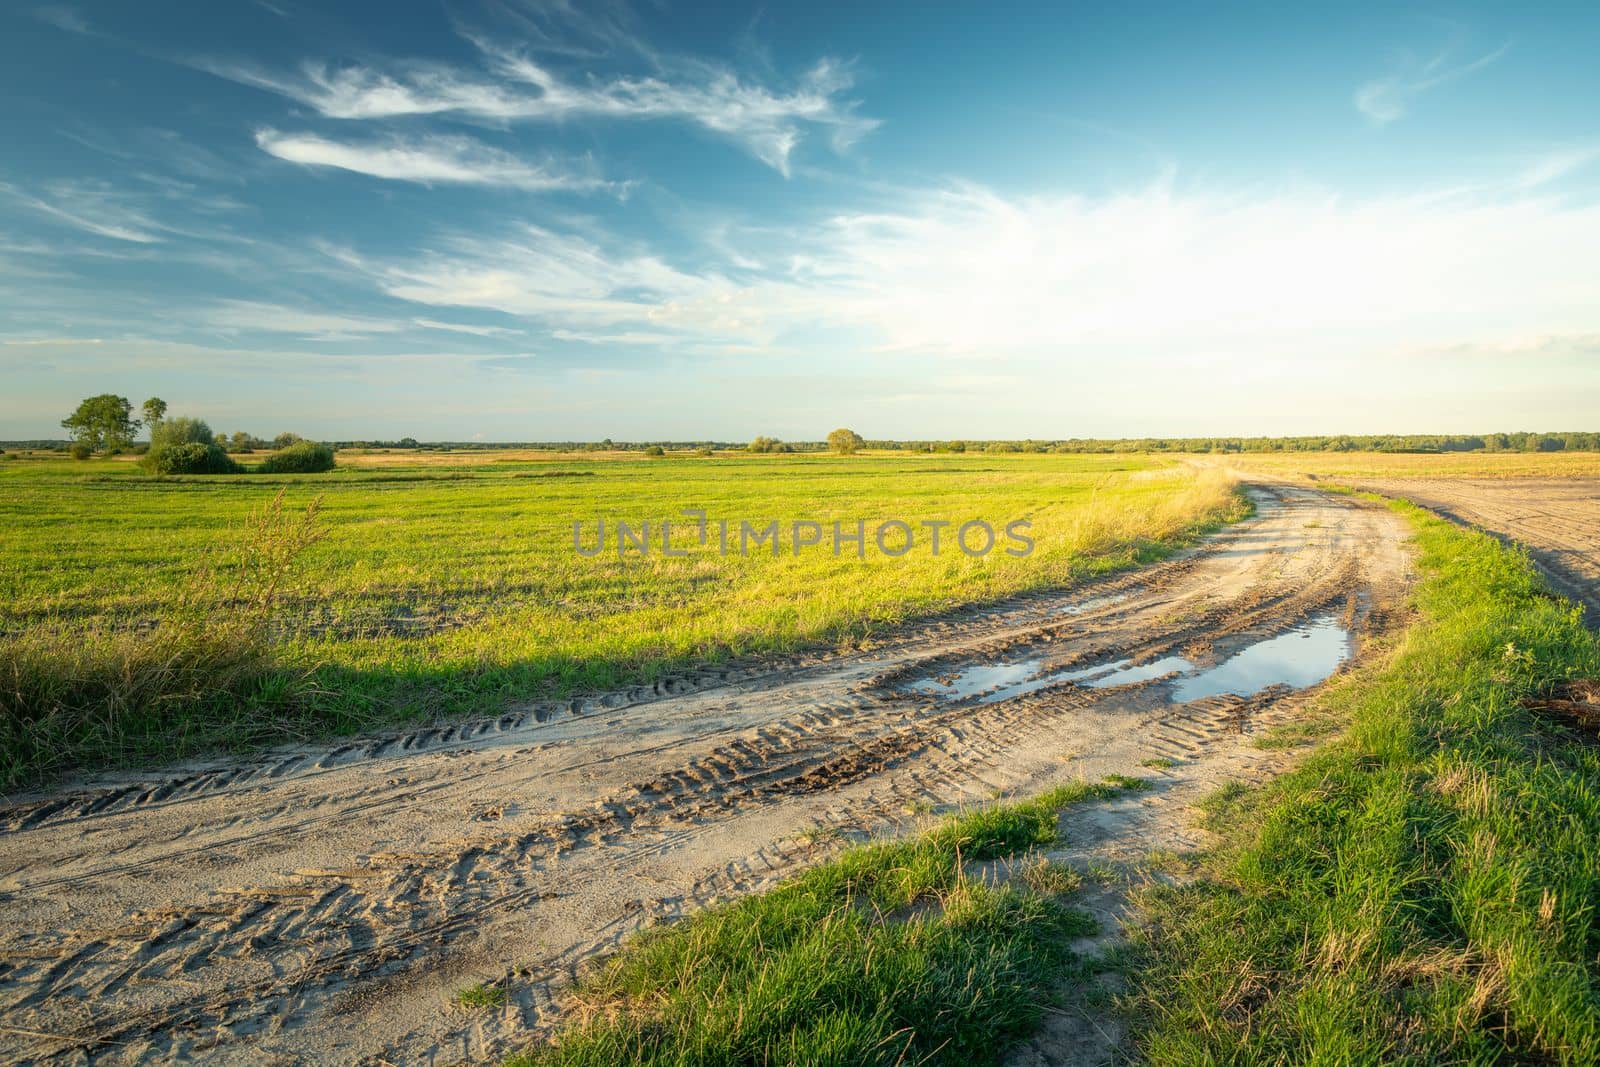 Sandy road with a puddle through rural fields and white clouds on the blue sky, Czulczyce, Lubelskie, Poland